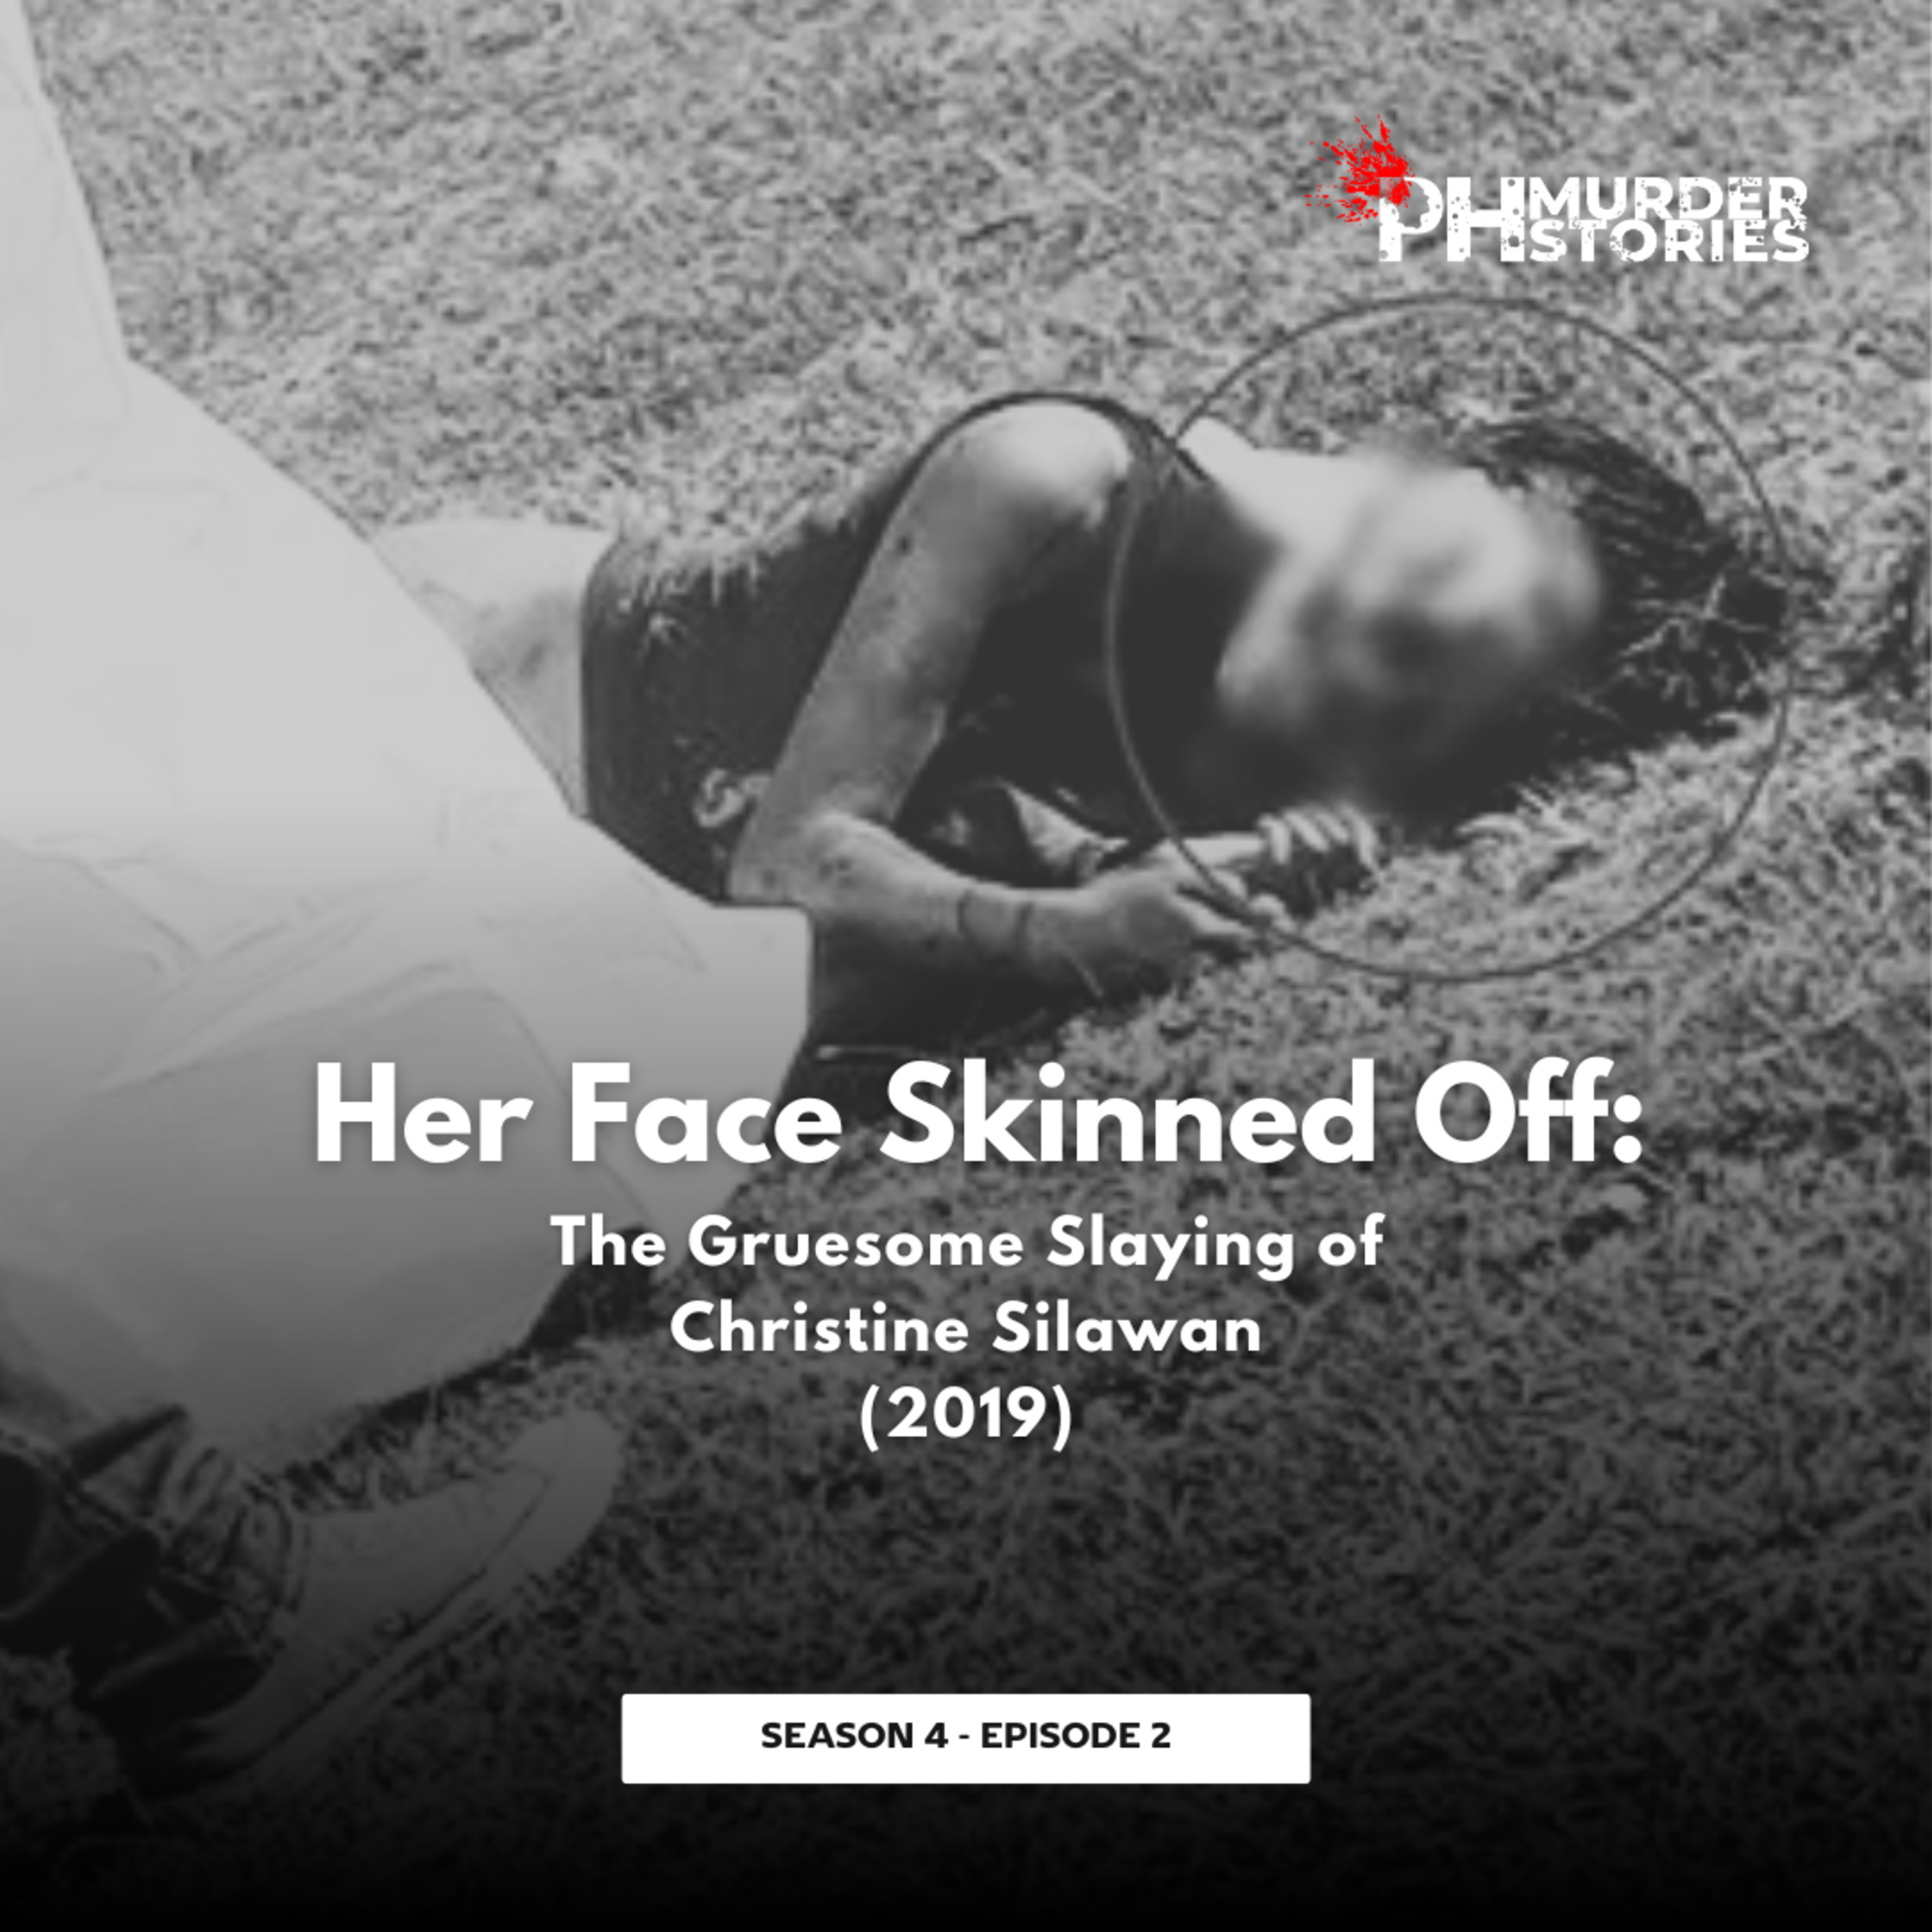 Her Face Skinned Off: The Gruesome Slaying of Christine Silawan (2019)